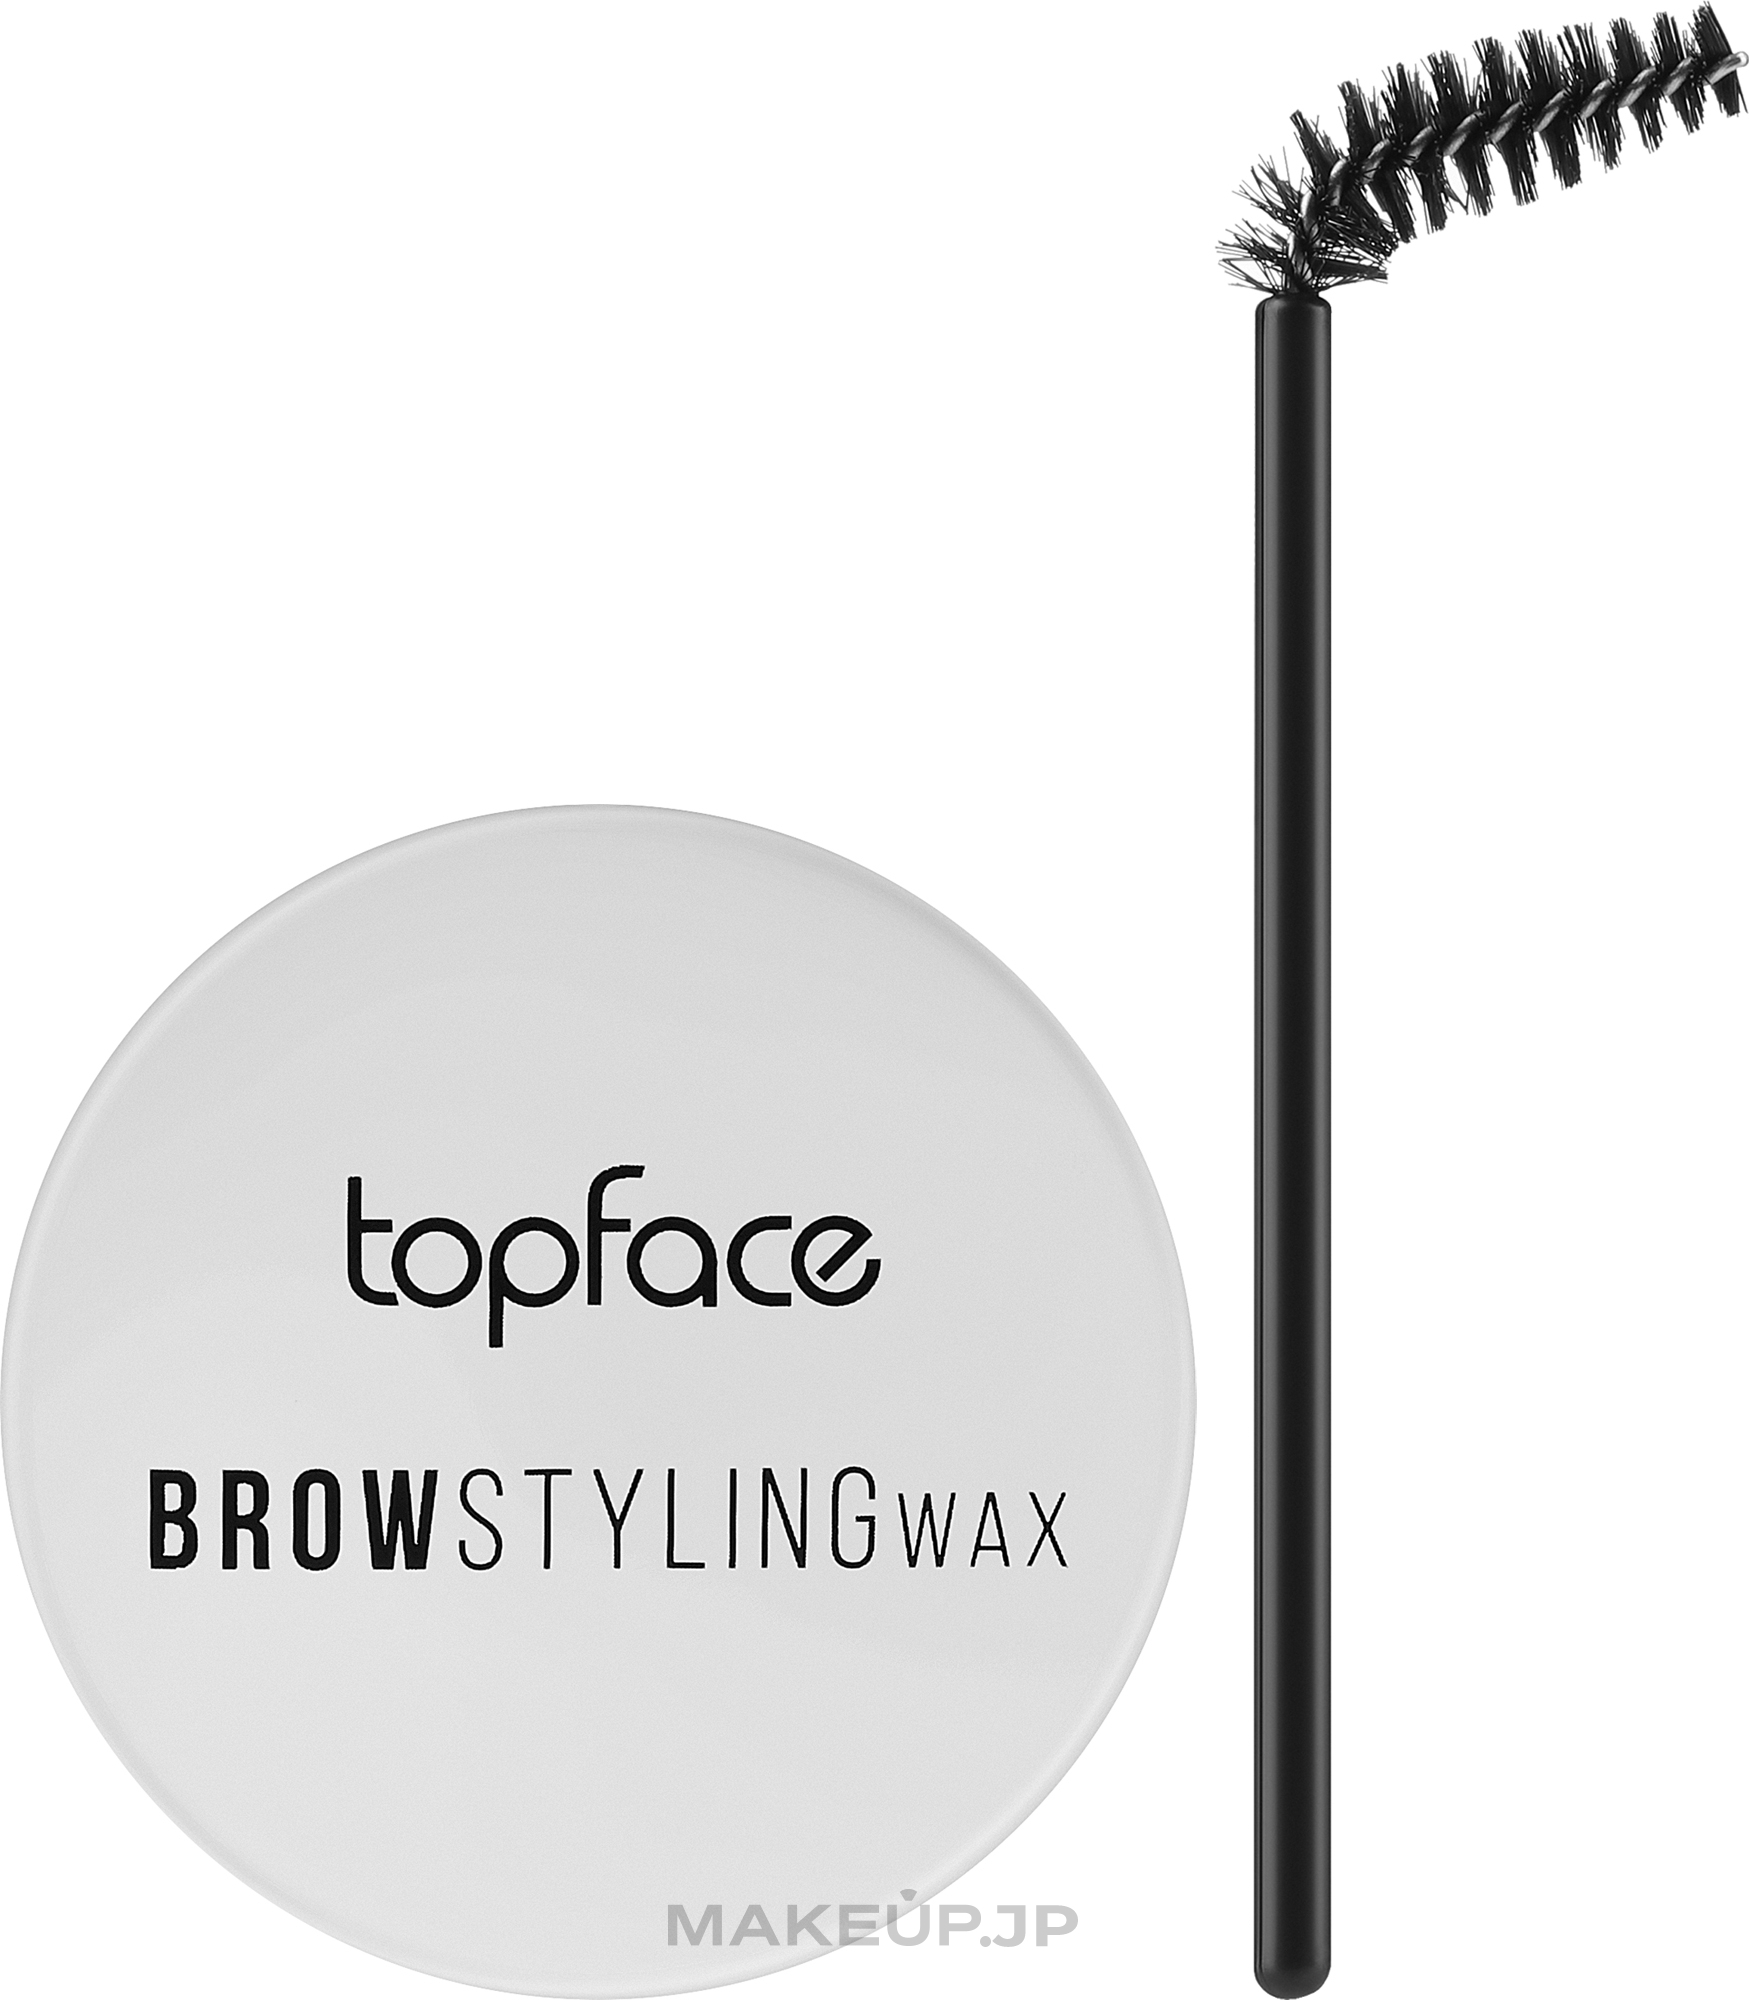 Brow Styling Wax - Topface Brow Styling Wax — photo 10 g